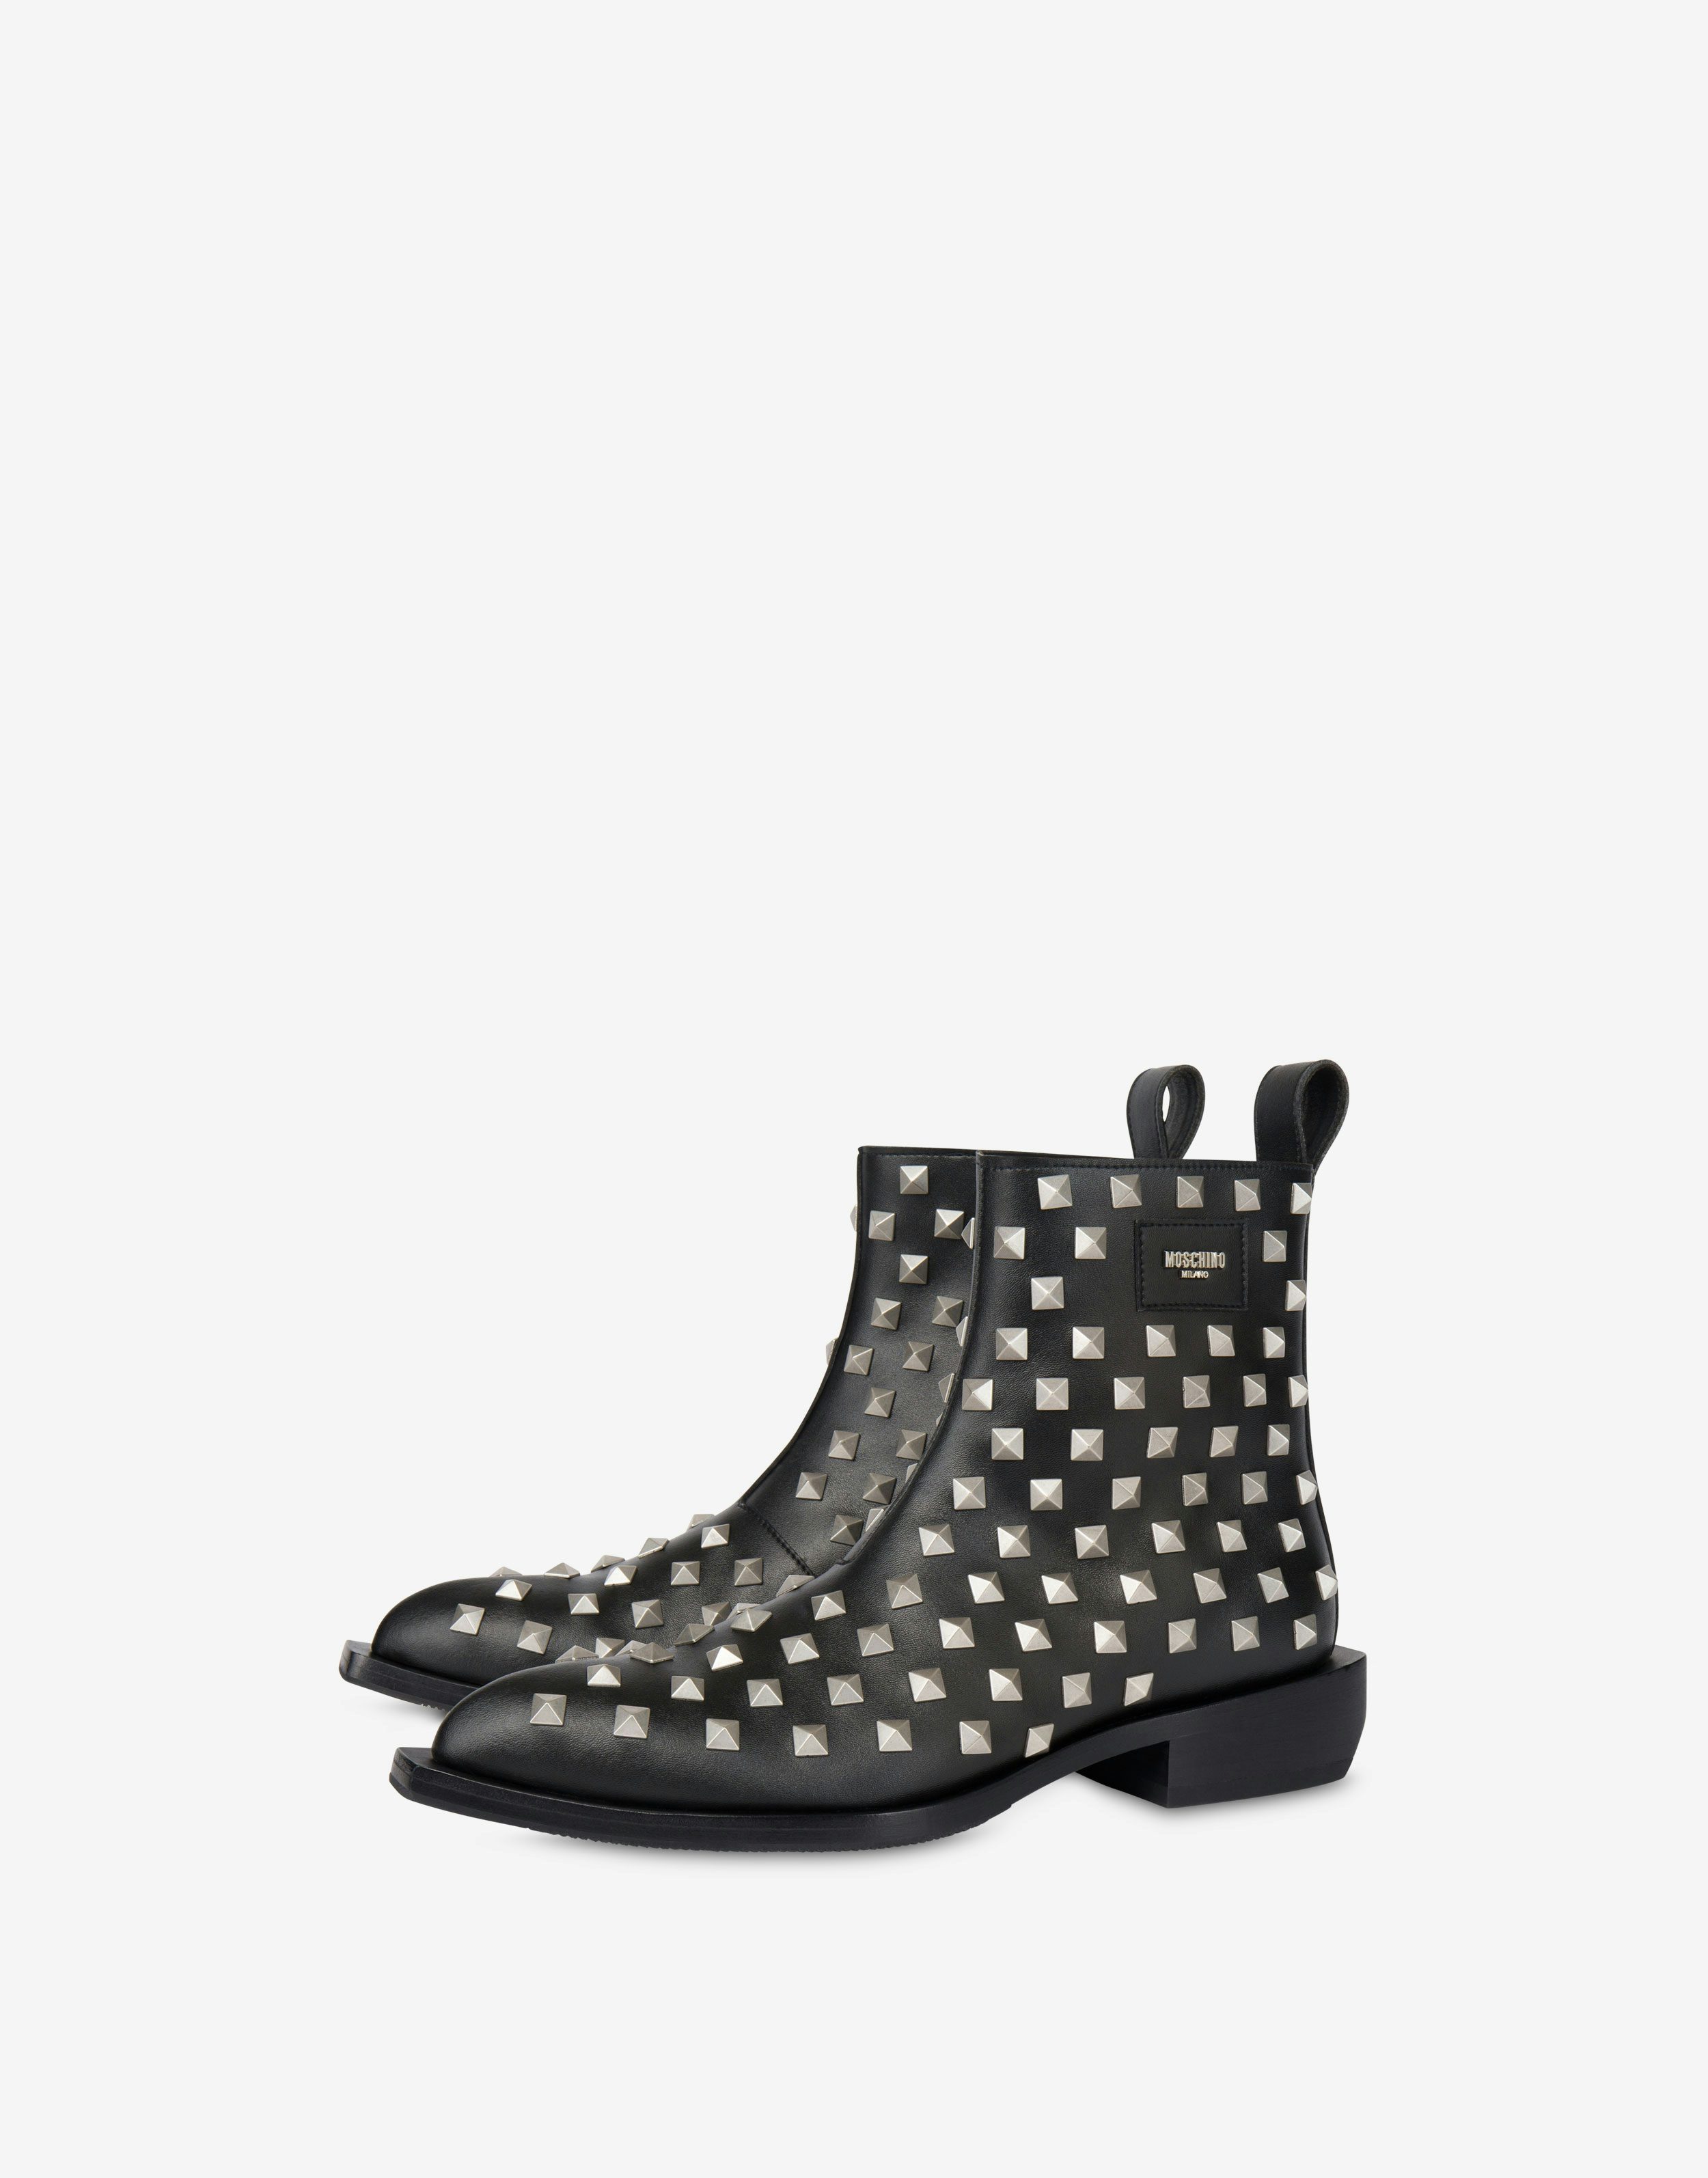 Moschino Plate studded camperos ankle boots